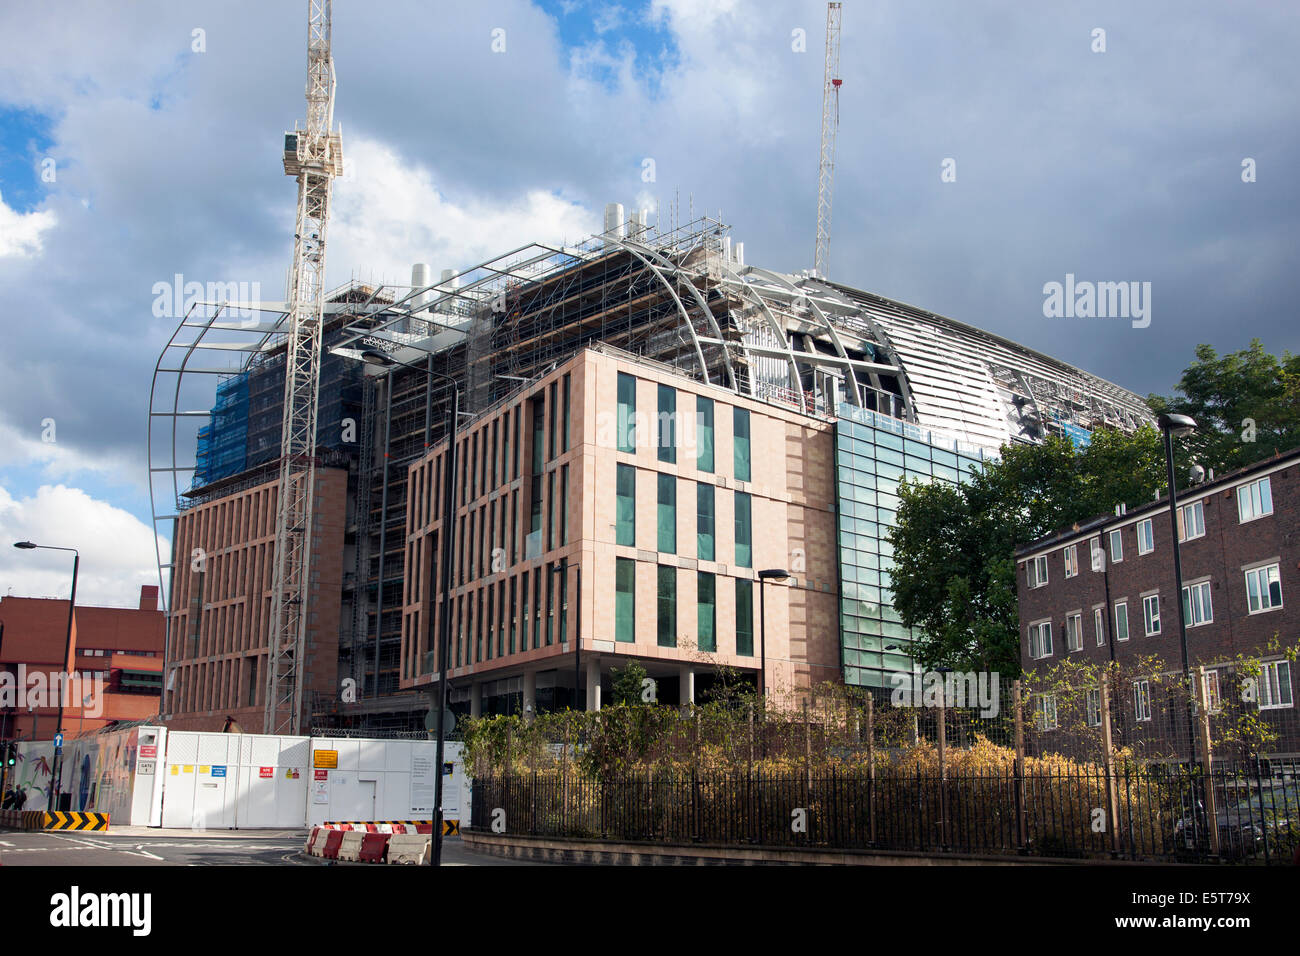 2nd August, 2014 - Construction of the Francis Crick Institute at King's Cross, London, England - opens 2015 Stock Photo